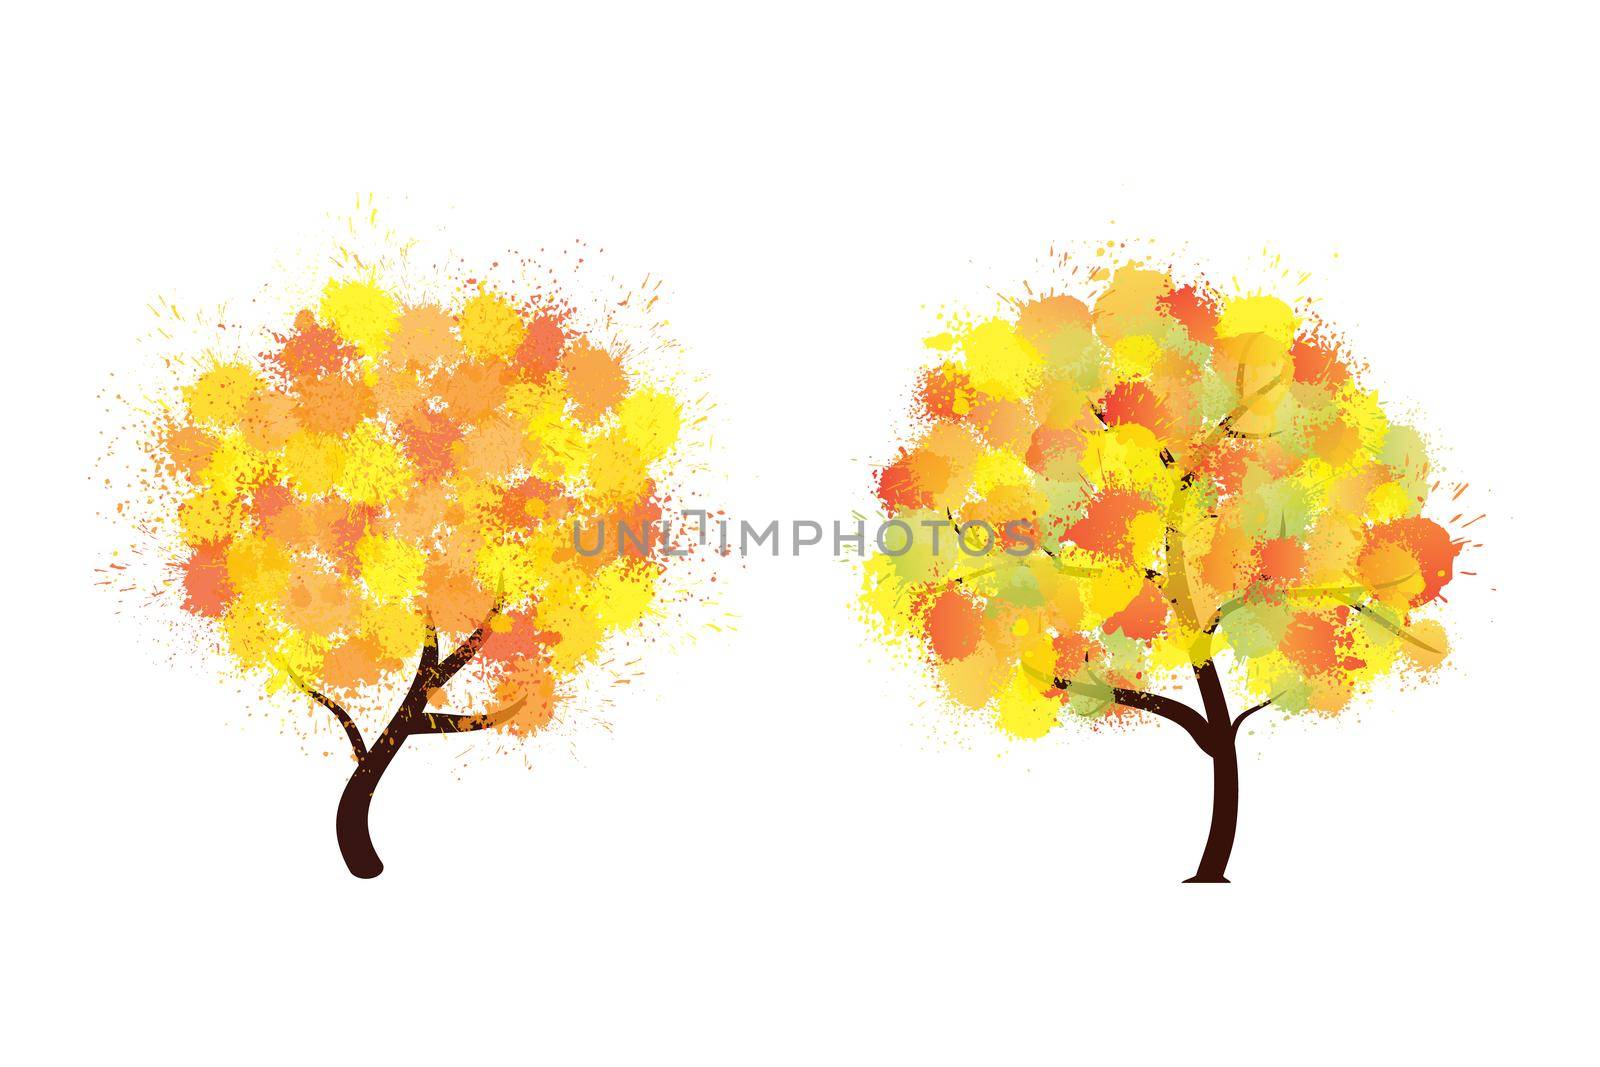 Autumn stylized trees forming by blots watercolor. Colorful paint splash trees with different abstract brush leaves. Eco design style symbols set. Jpeg illustration.